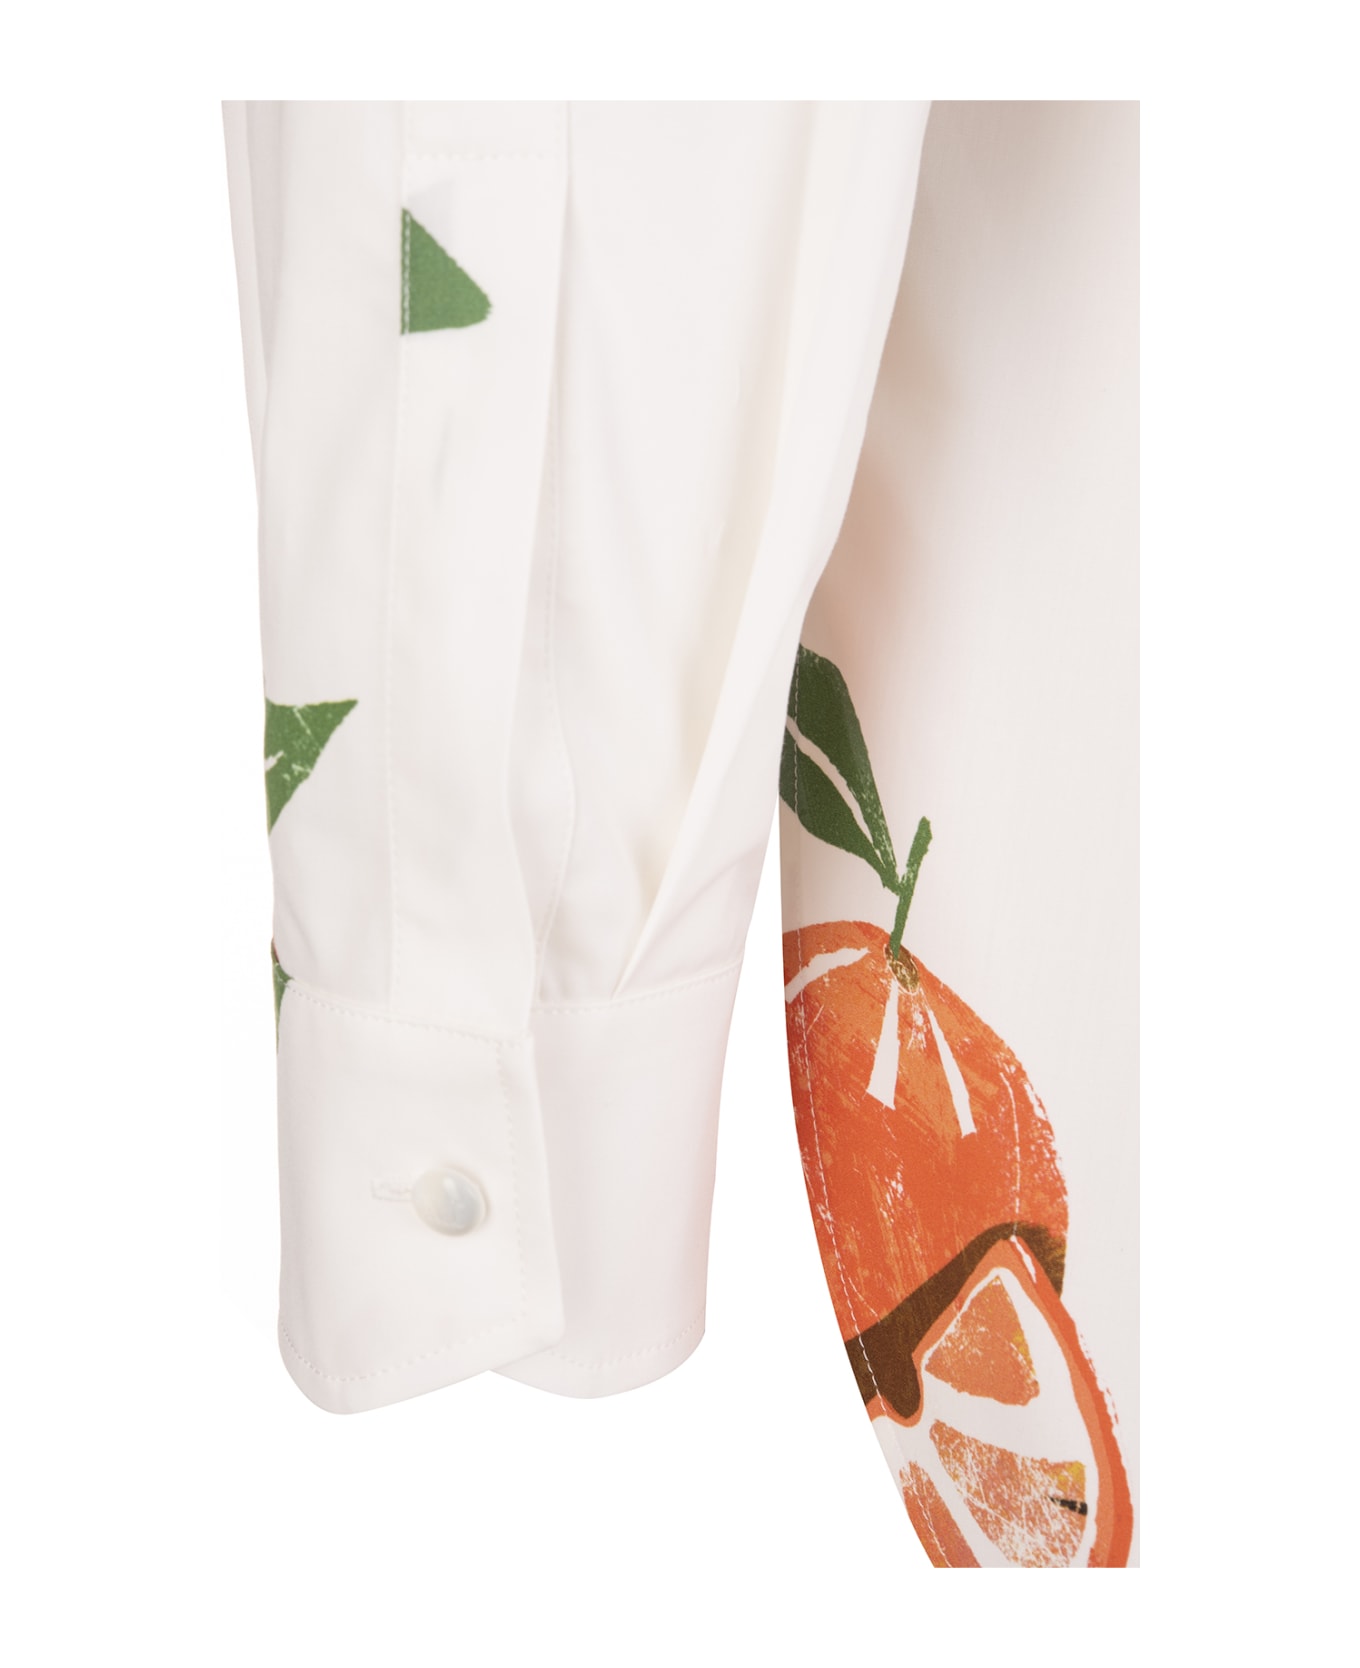 Max Mara White Curacao Blouse With Oranges - Bianco/multicolor